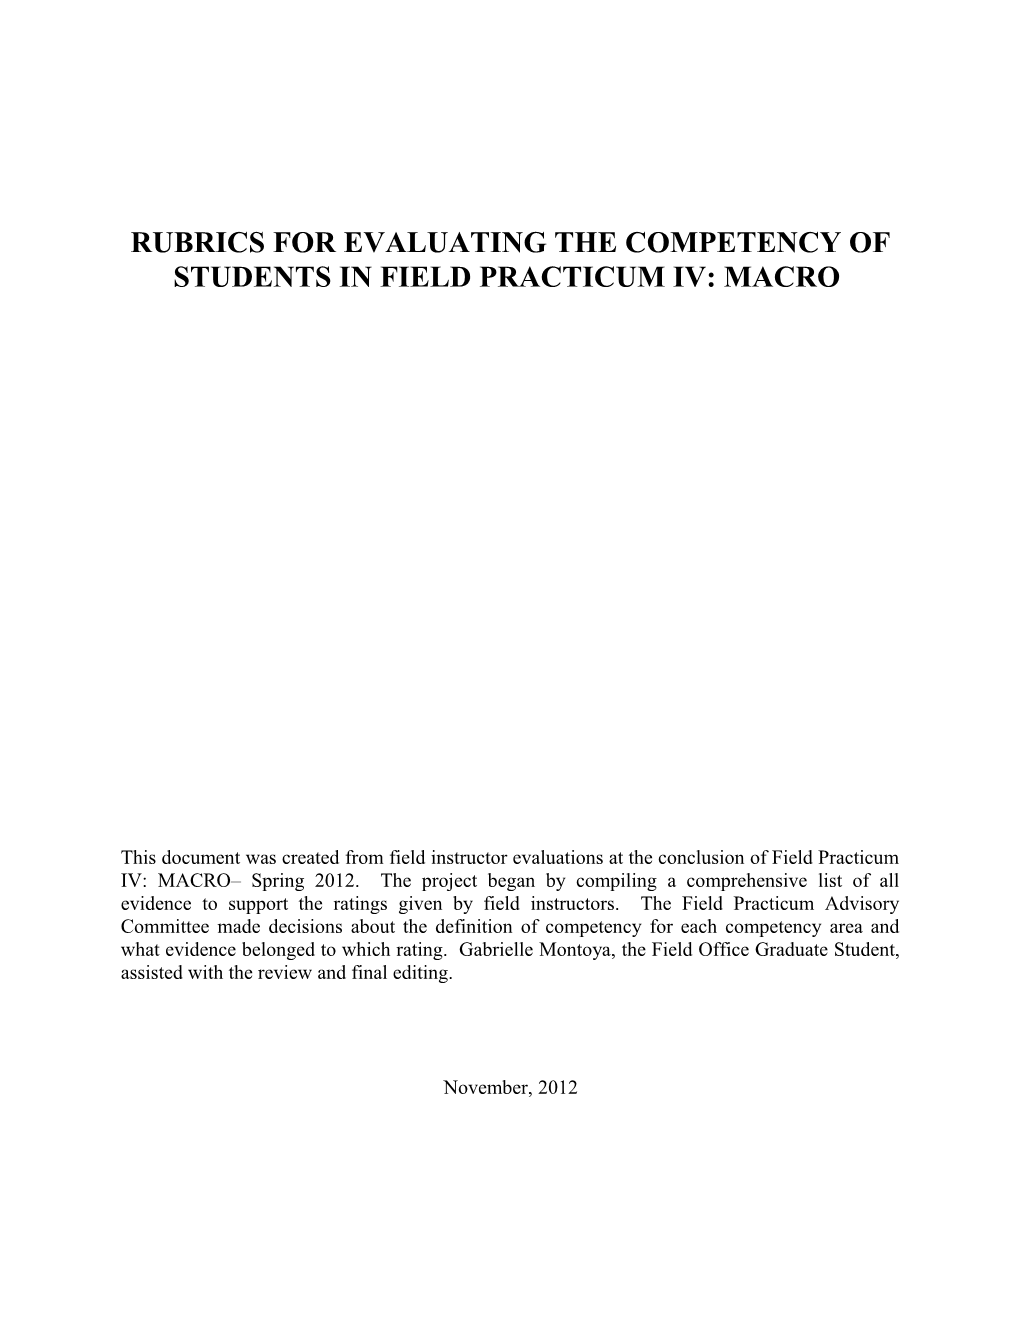 Rubrics for Evaluating the Competency of Students in Field Practicum Iv: Macro